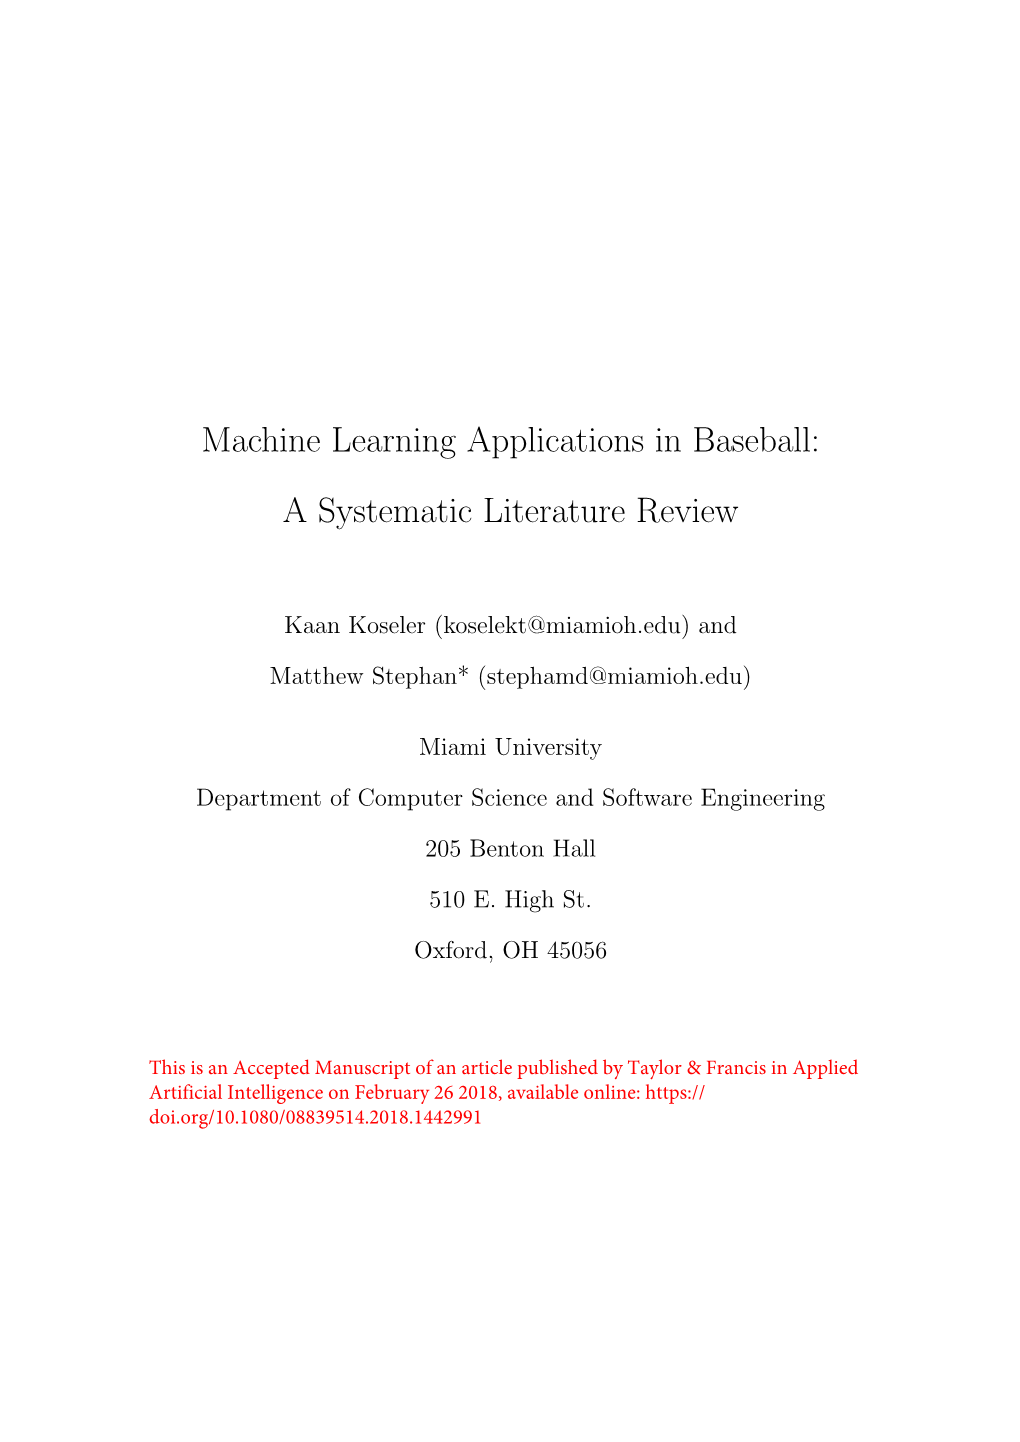 Machine Learning Applications in Baseball: a Systematic Literature Review